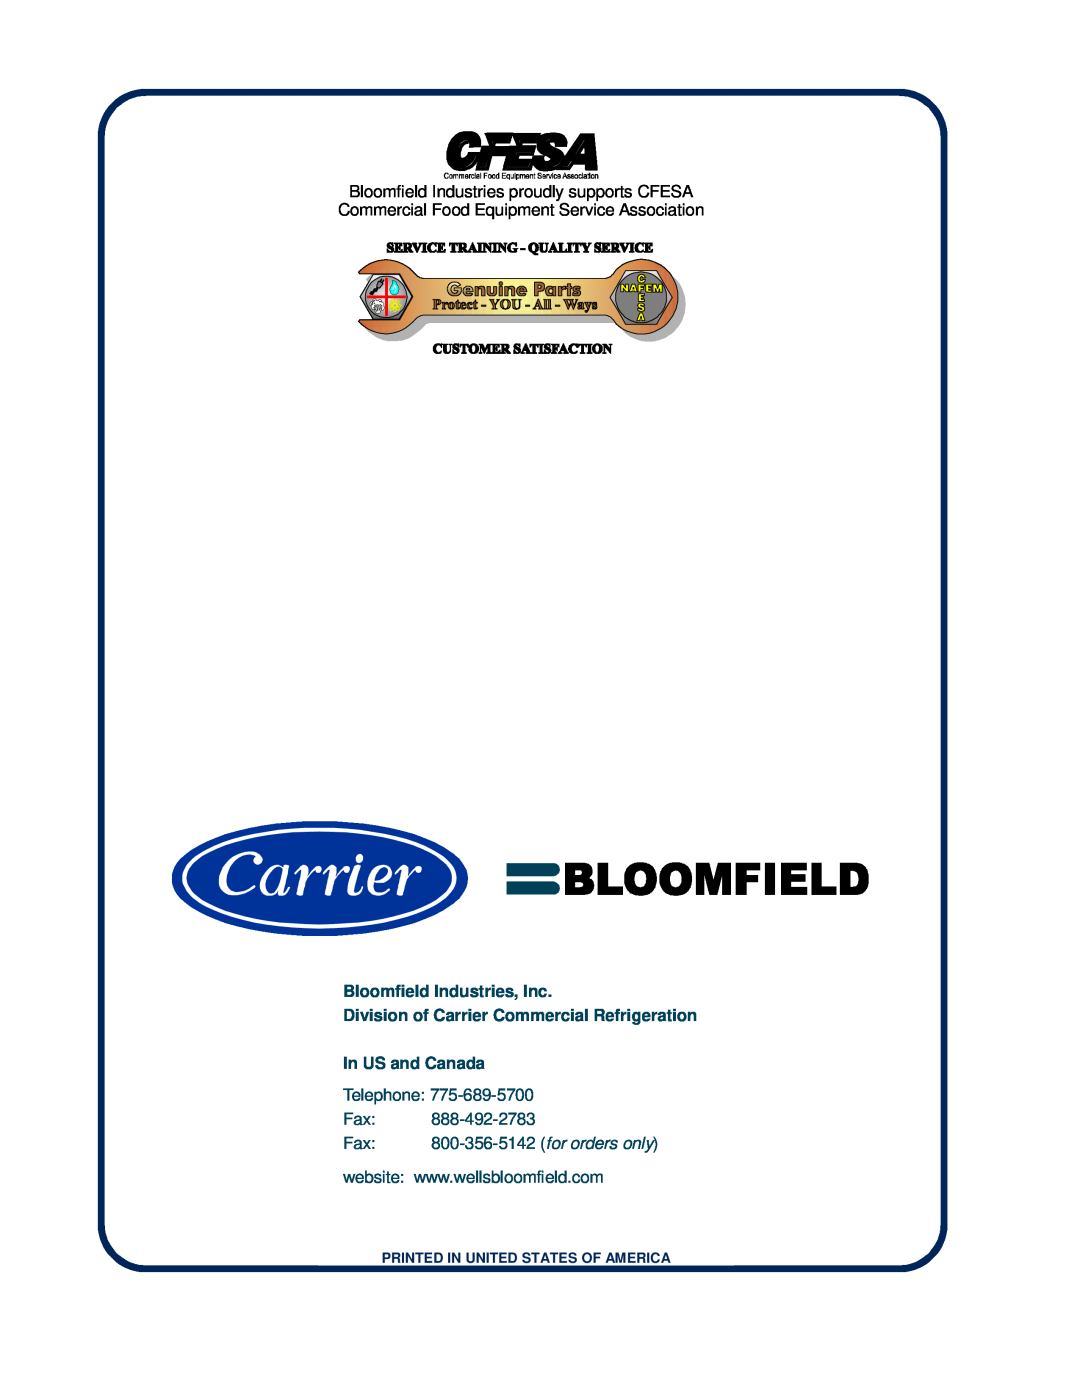 Bloomfield 2030 Bloomfield Industries, Inc, Division of Carrier Commercial Refrigeration In US and Canada, Telephone 